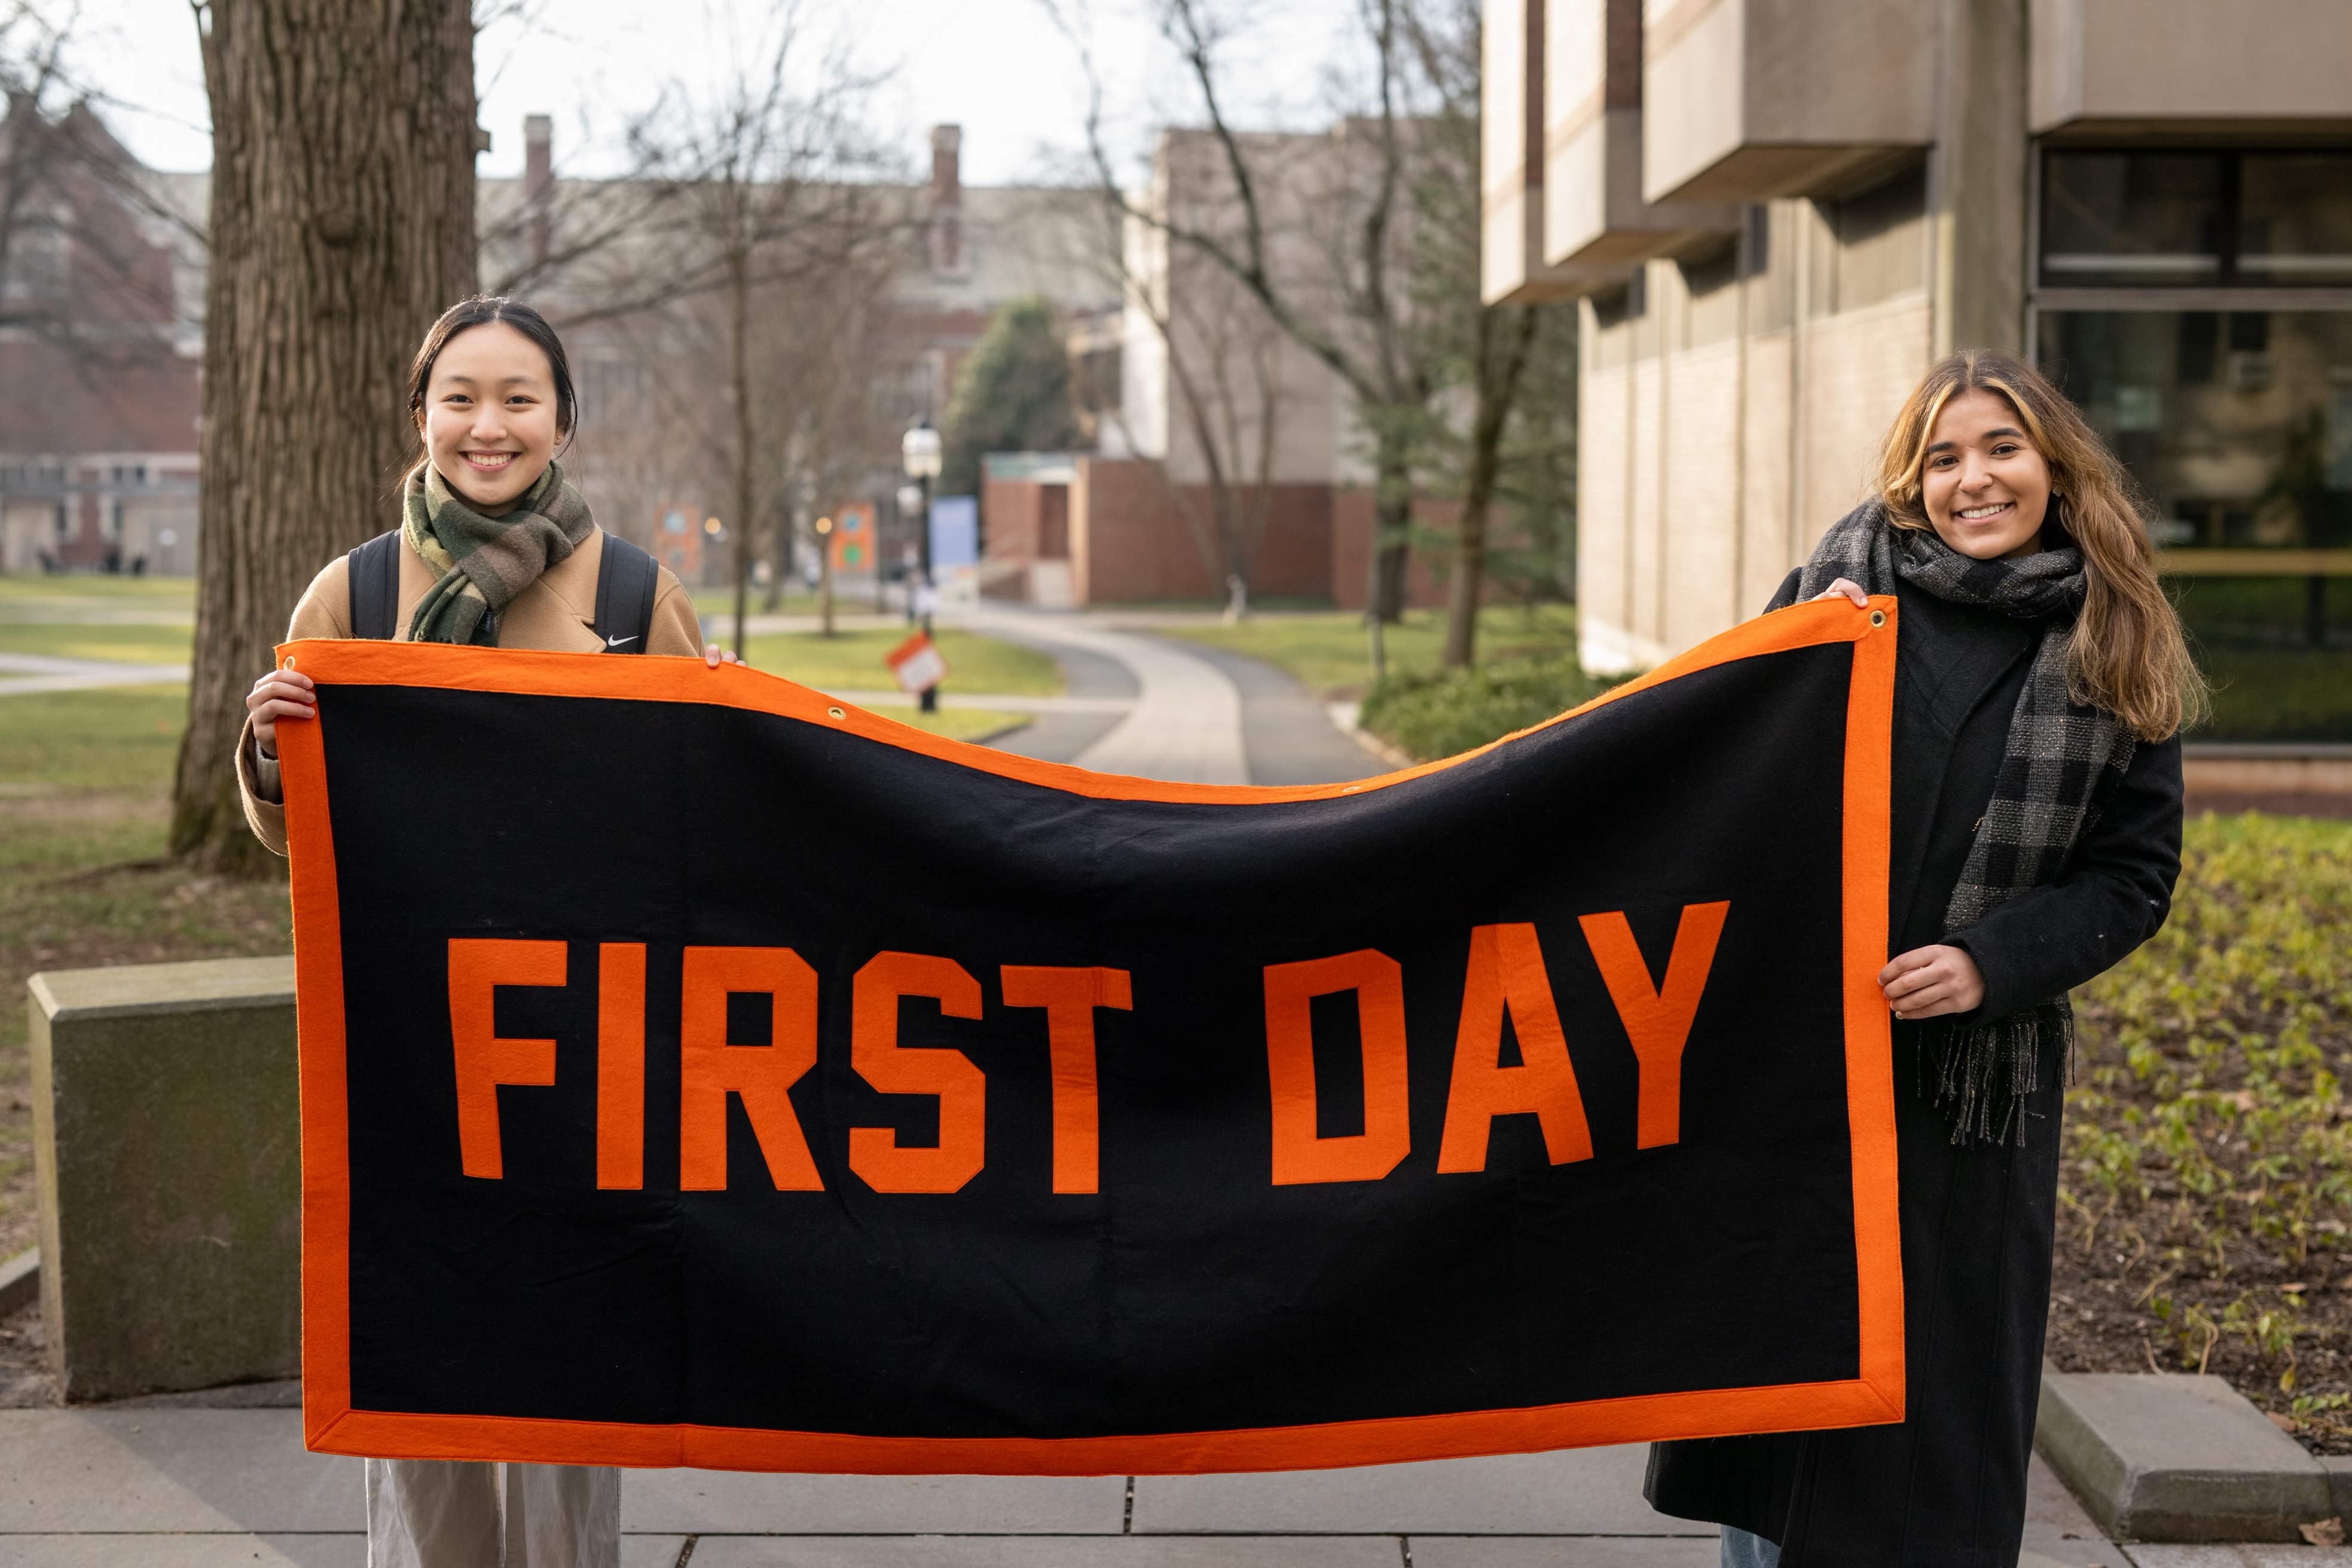 Two girls holding a banner that says "First Day"